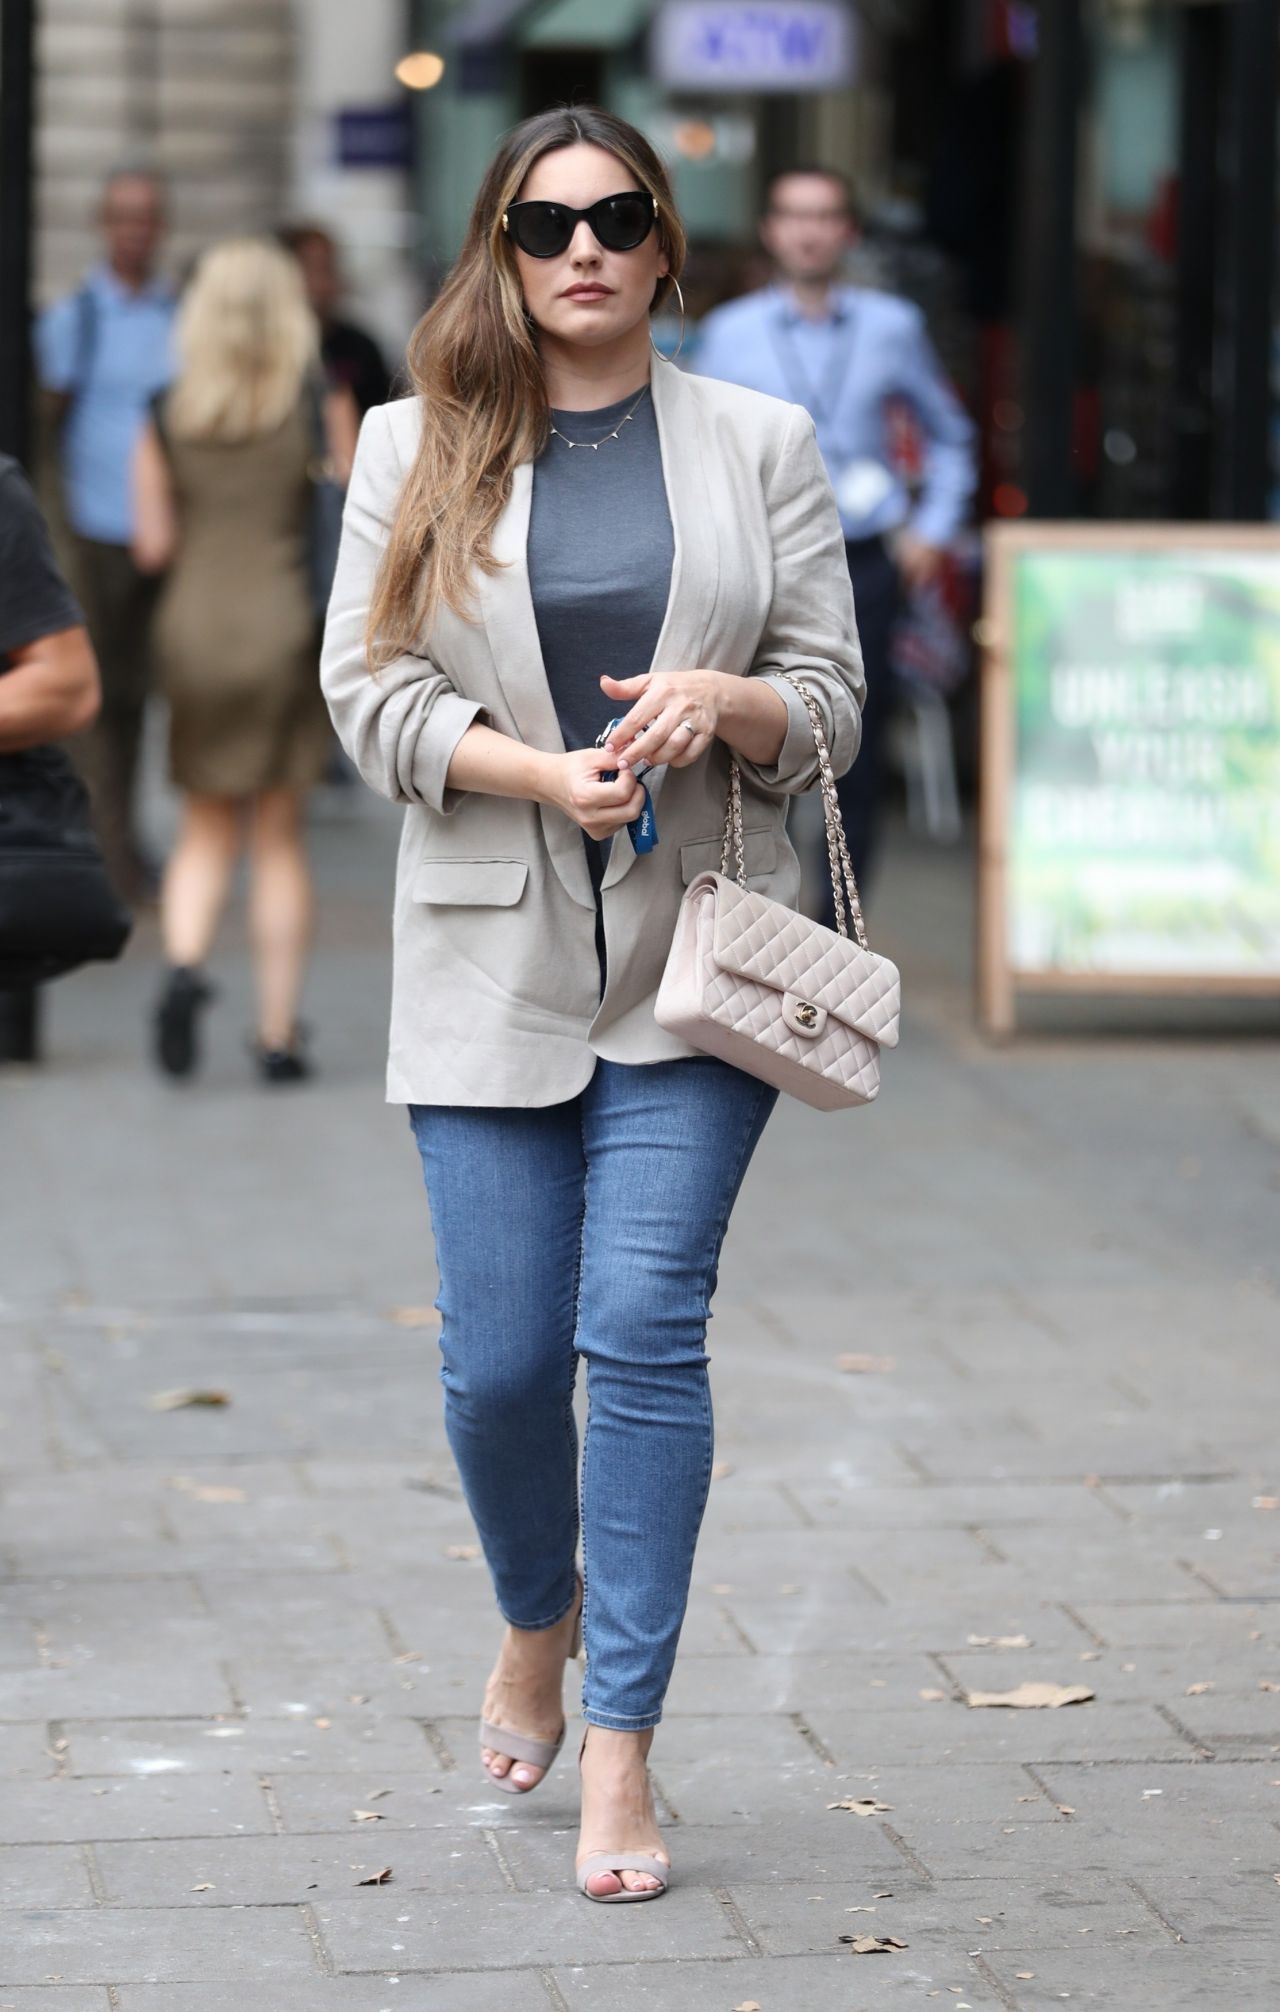 kelly-brook-in-casual-outfit-arriving-at-global-offices-in-london-08-08-2019-0.jpg